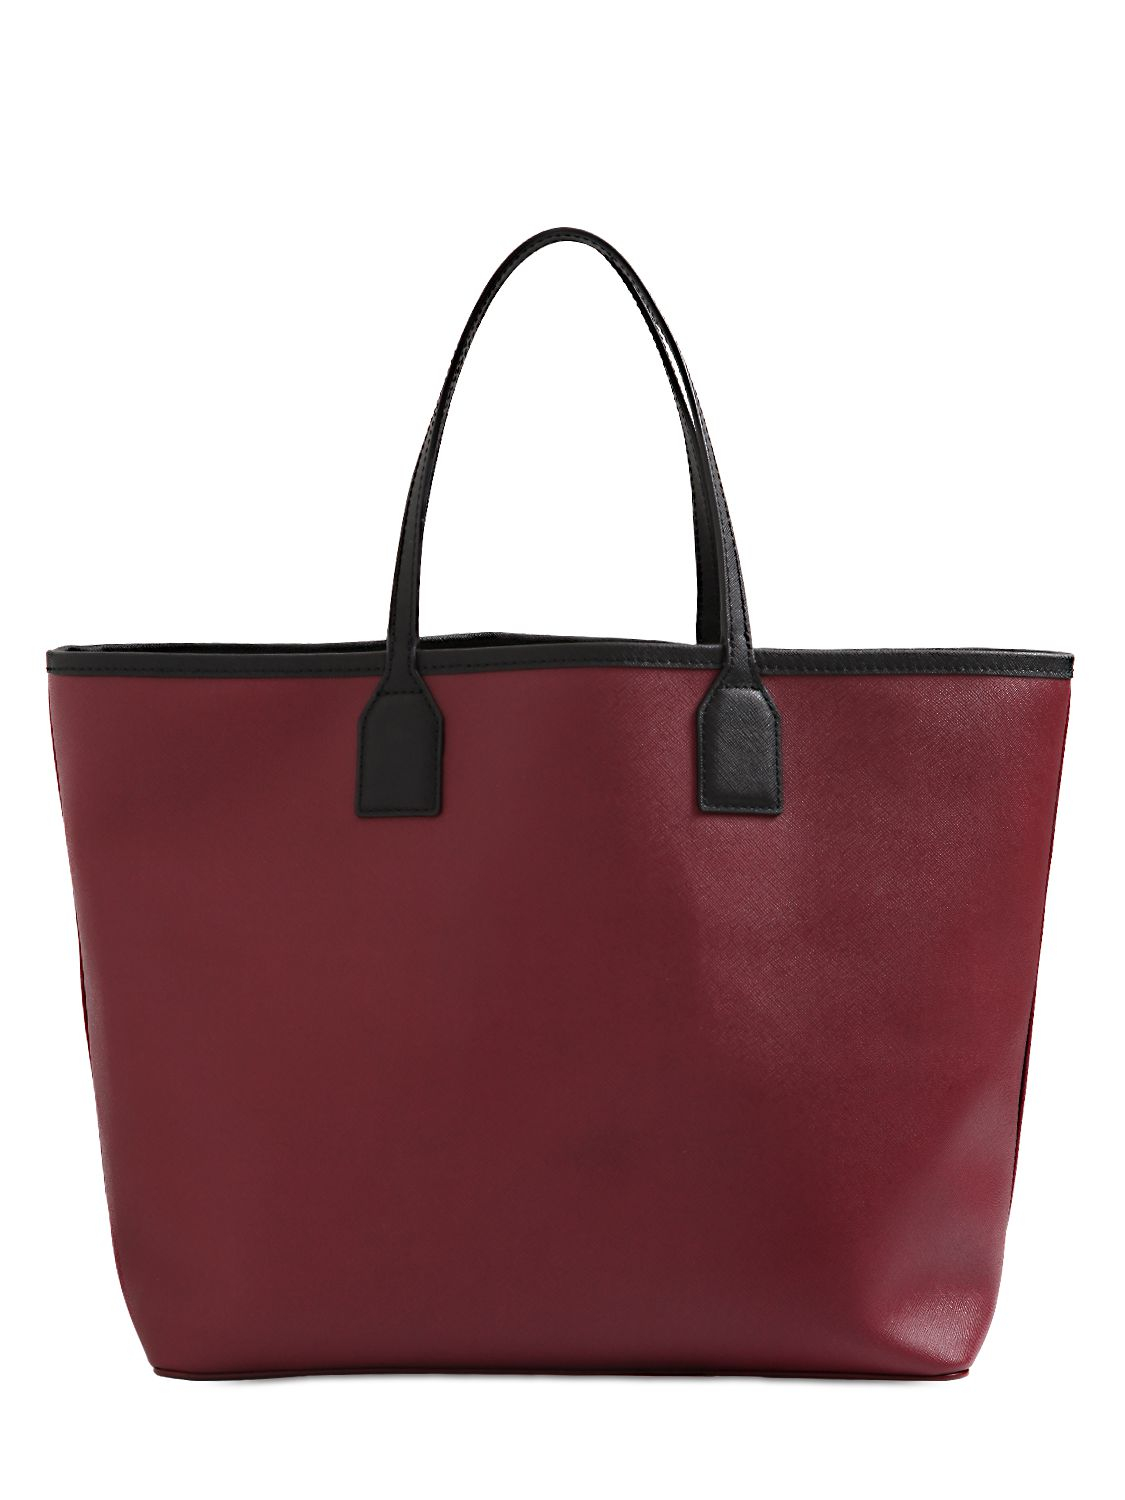 Karl Lagerfeld K Choupette Love Faux Leather Tote Bag in Red - Lyst